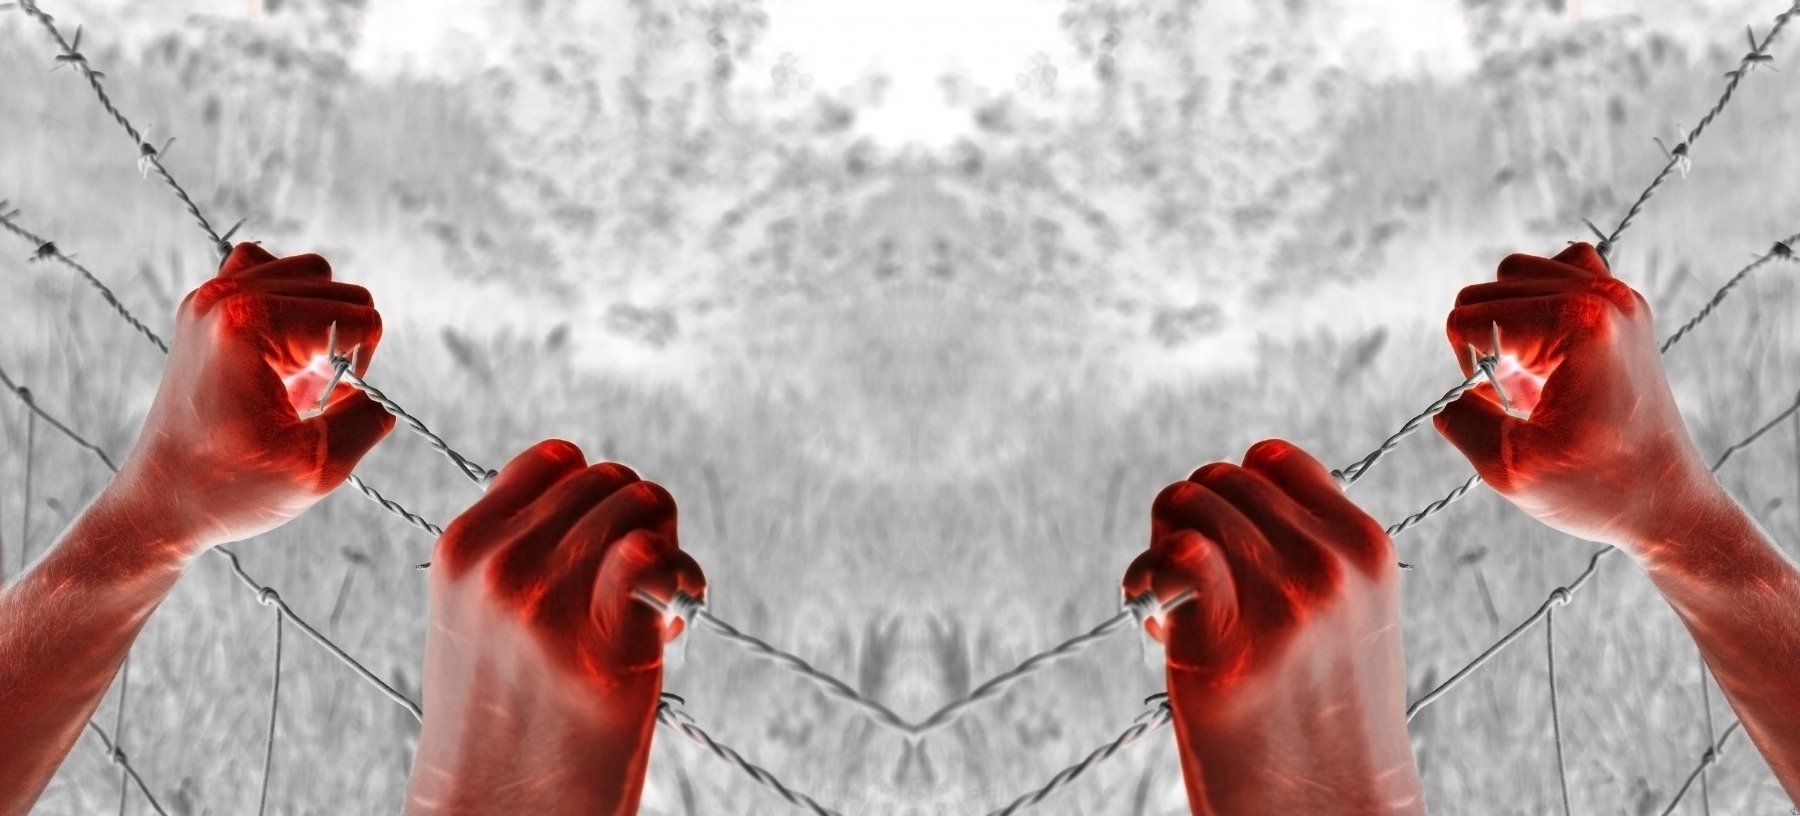 Artistic blood tortured hand grasping desperately barbed wire